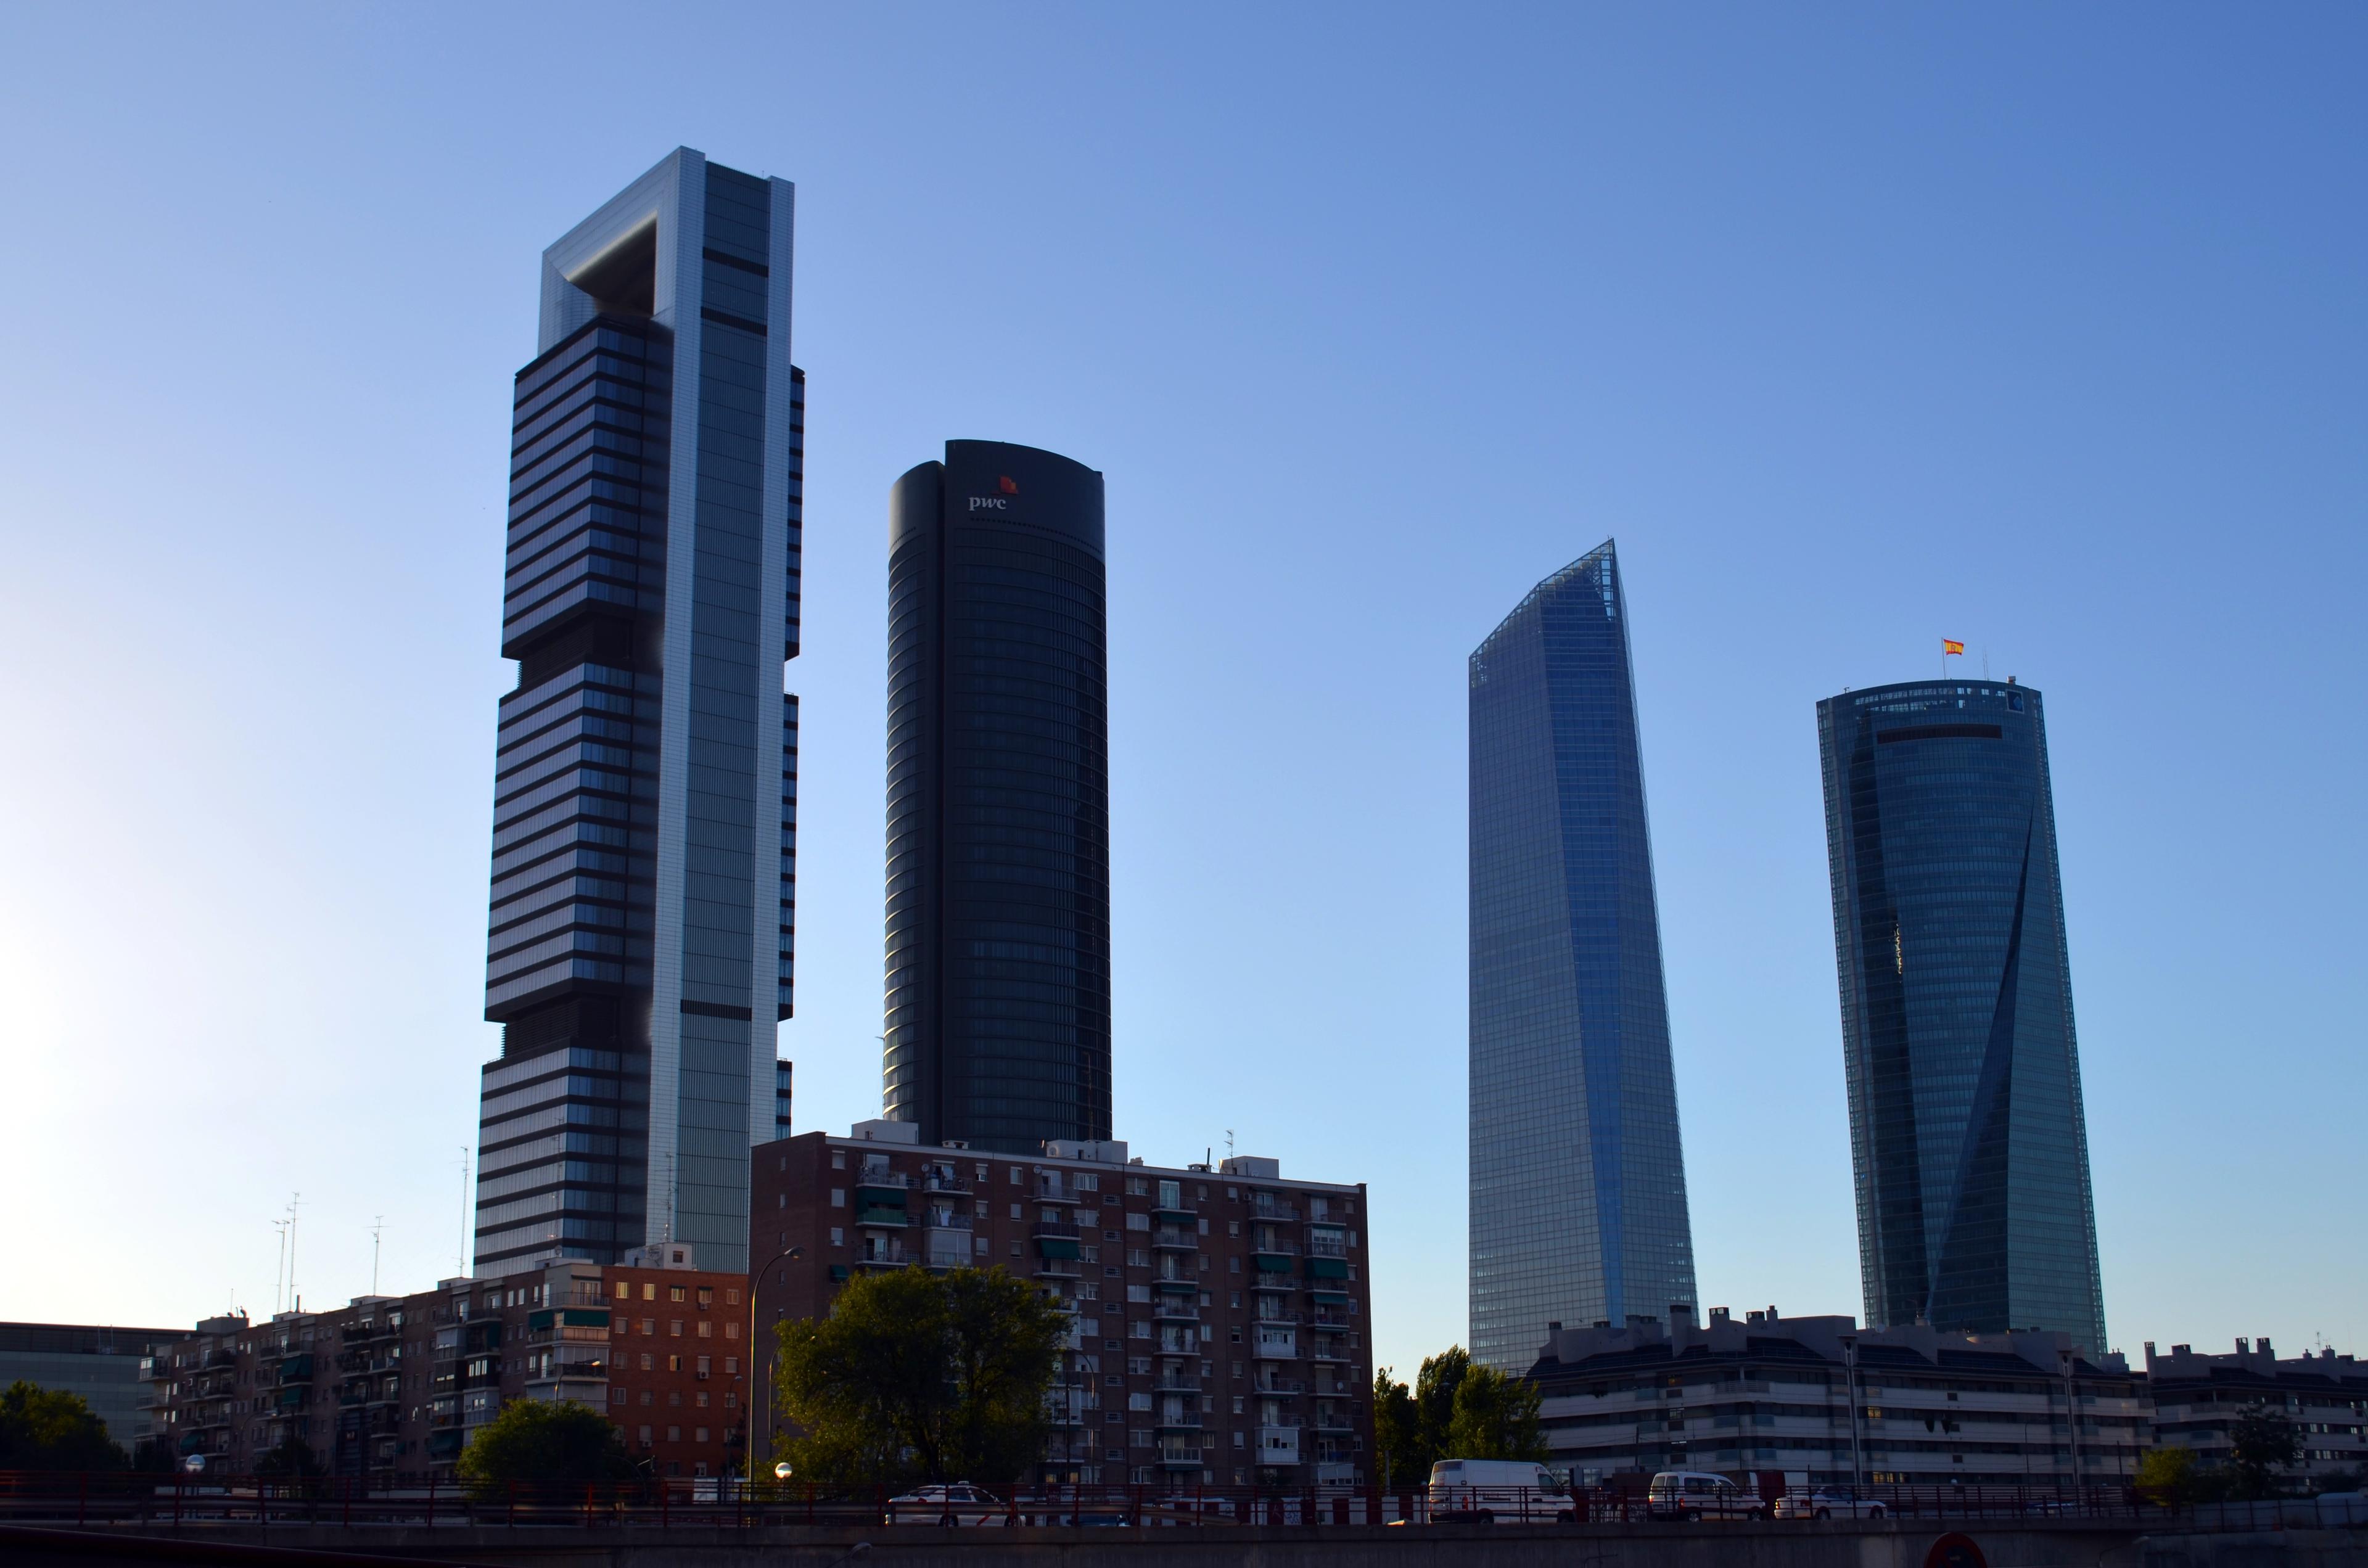 Cover image of this place Cuatro Torres